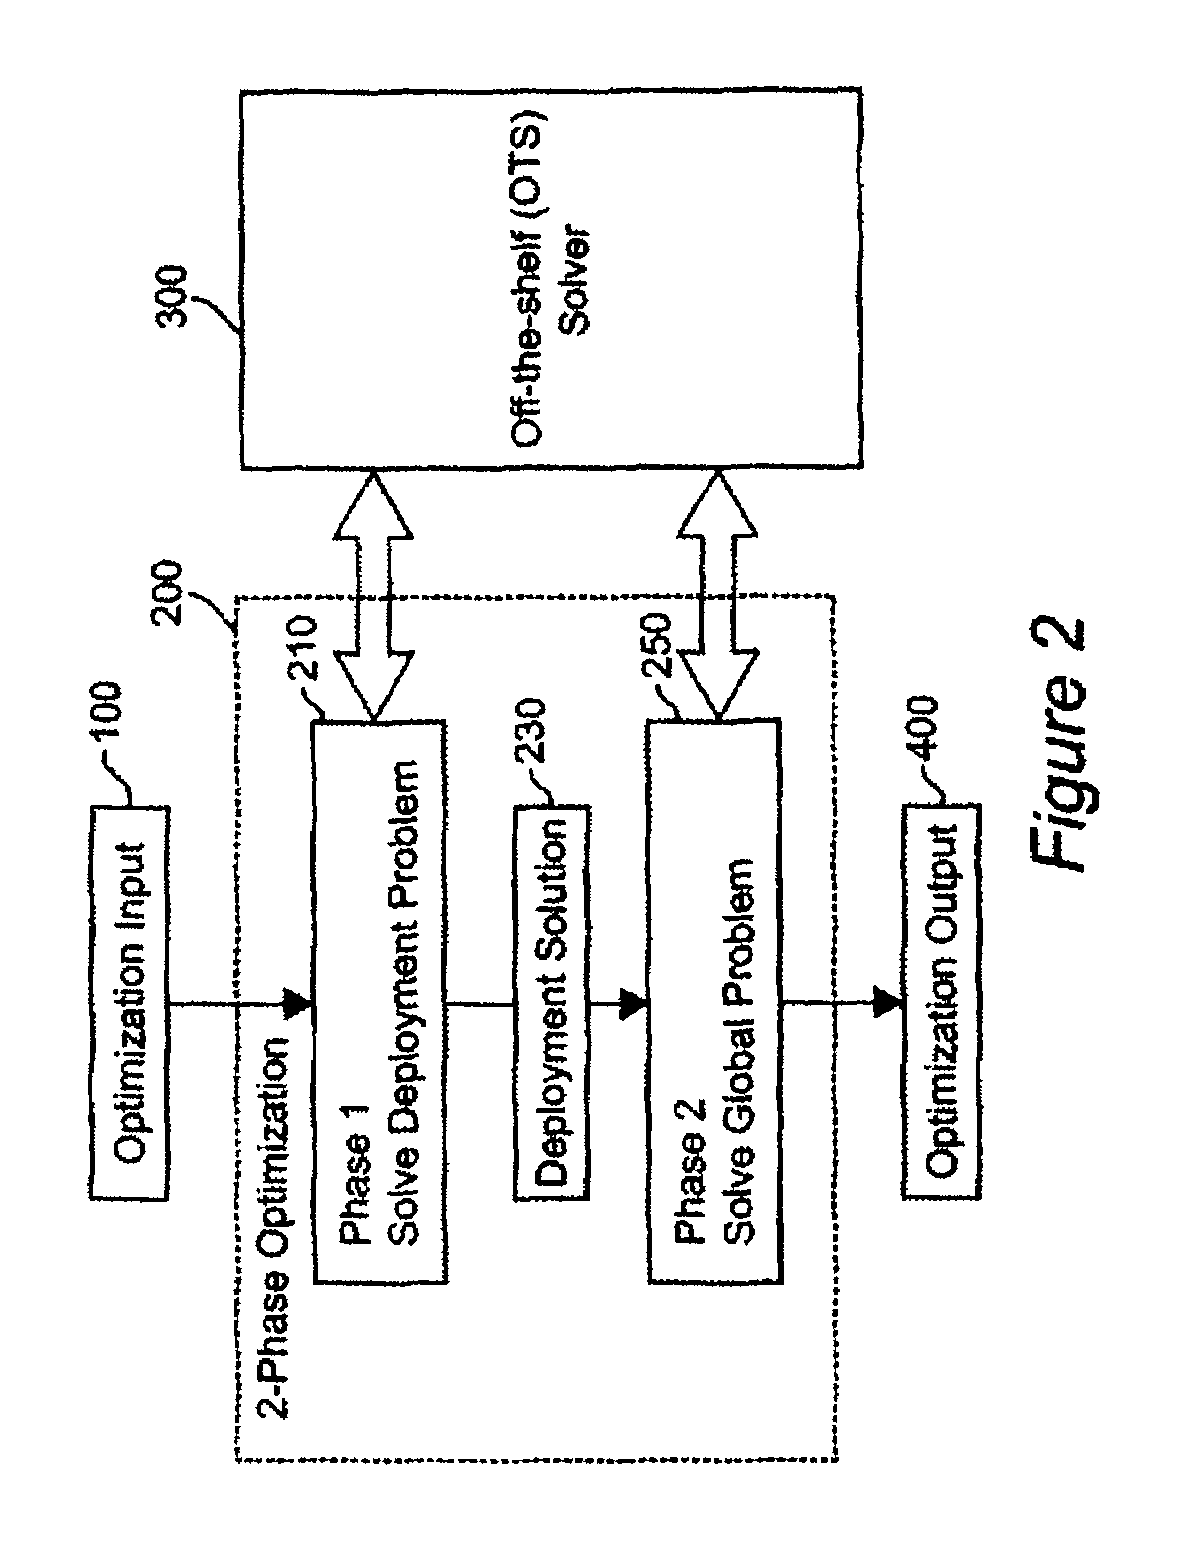 System and method for strategic budgeting of initial response for managing wildfires